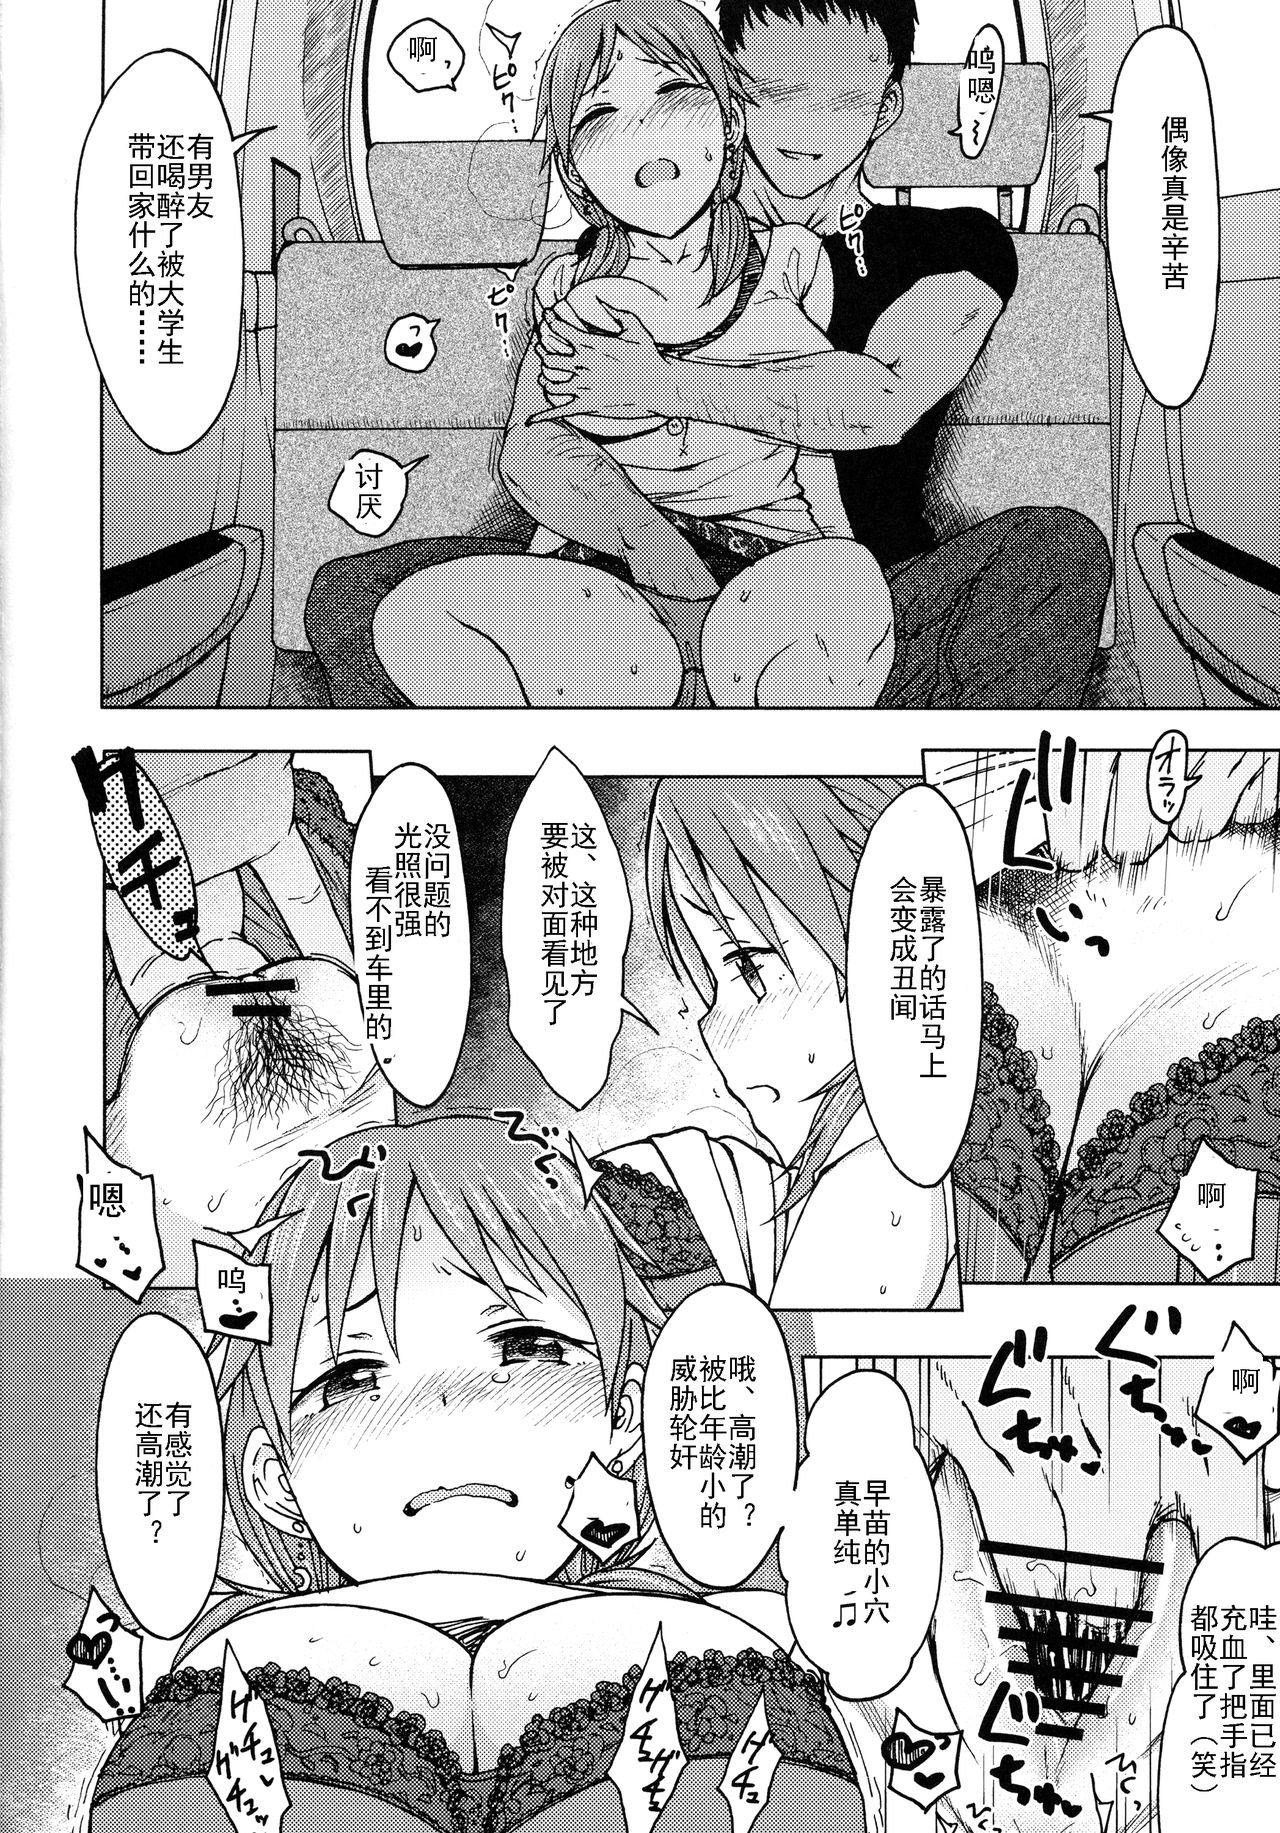 Perfect Porn Paranoid Parade - The idolmaster Goth - Page 4